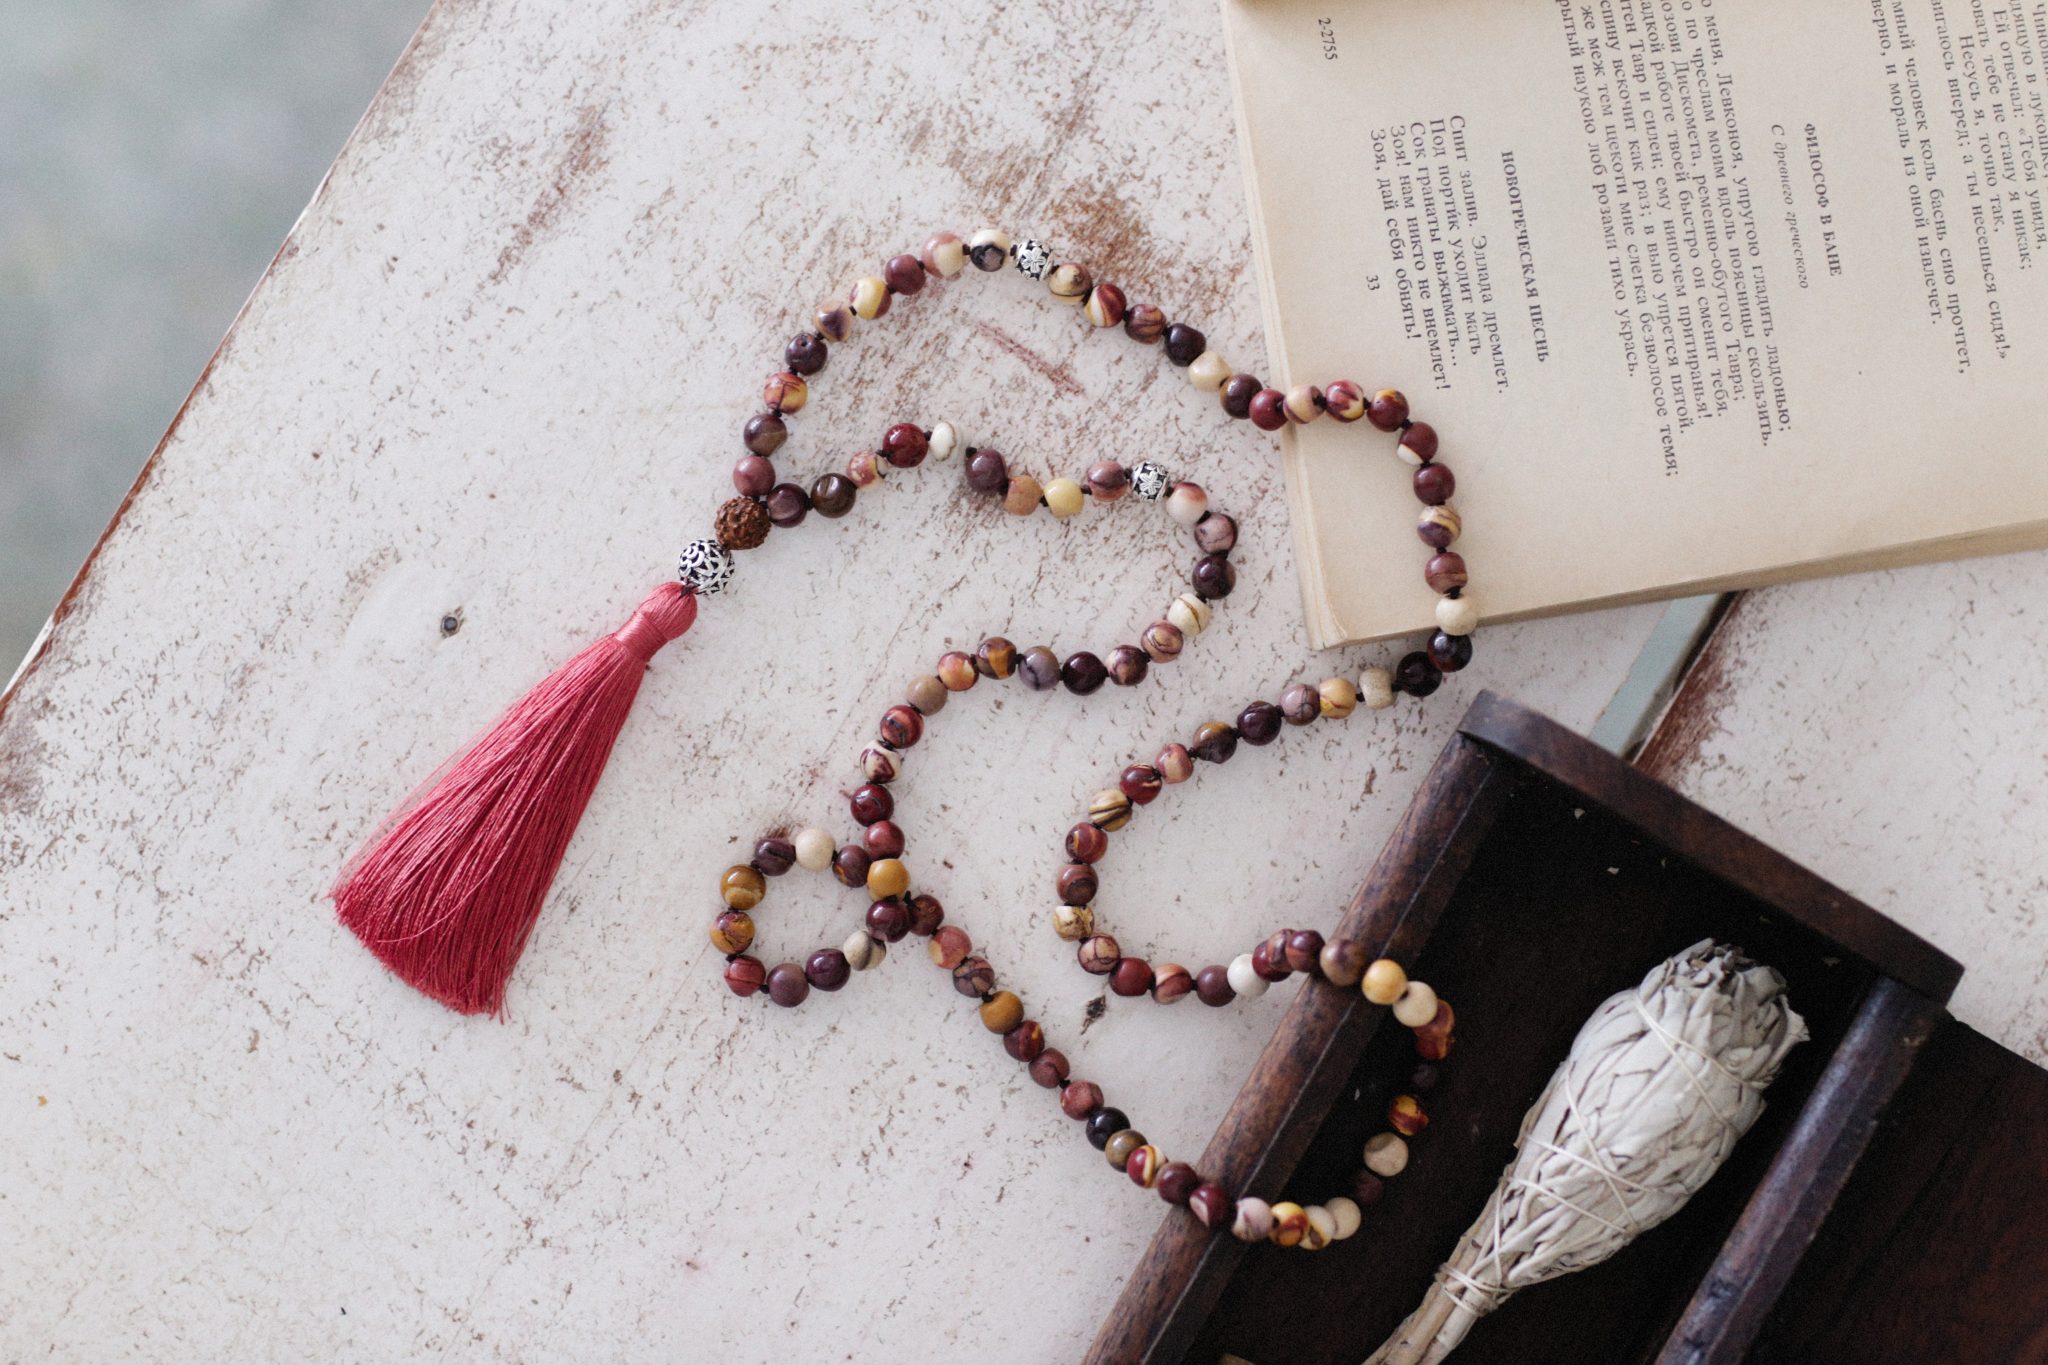 Photo of Misbaha, Islamic prayer beads, with a link that takes you to the Contact Us page to contact the Mosque about funeral services.